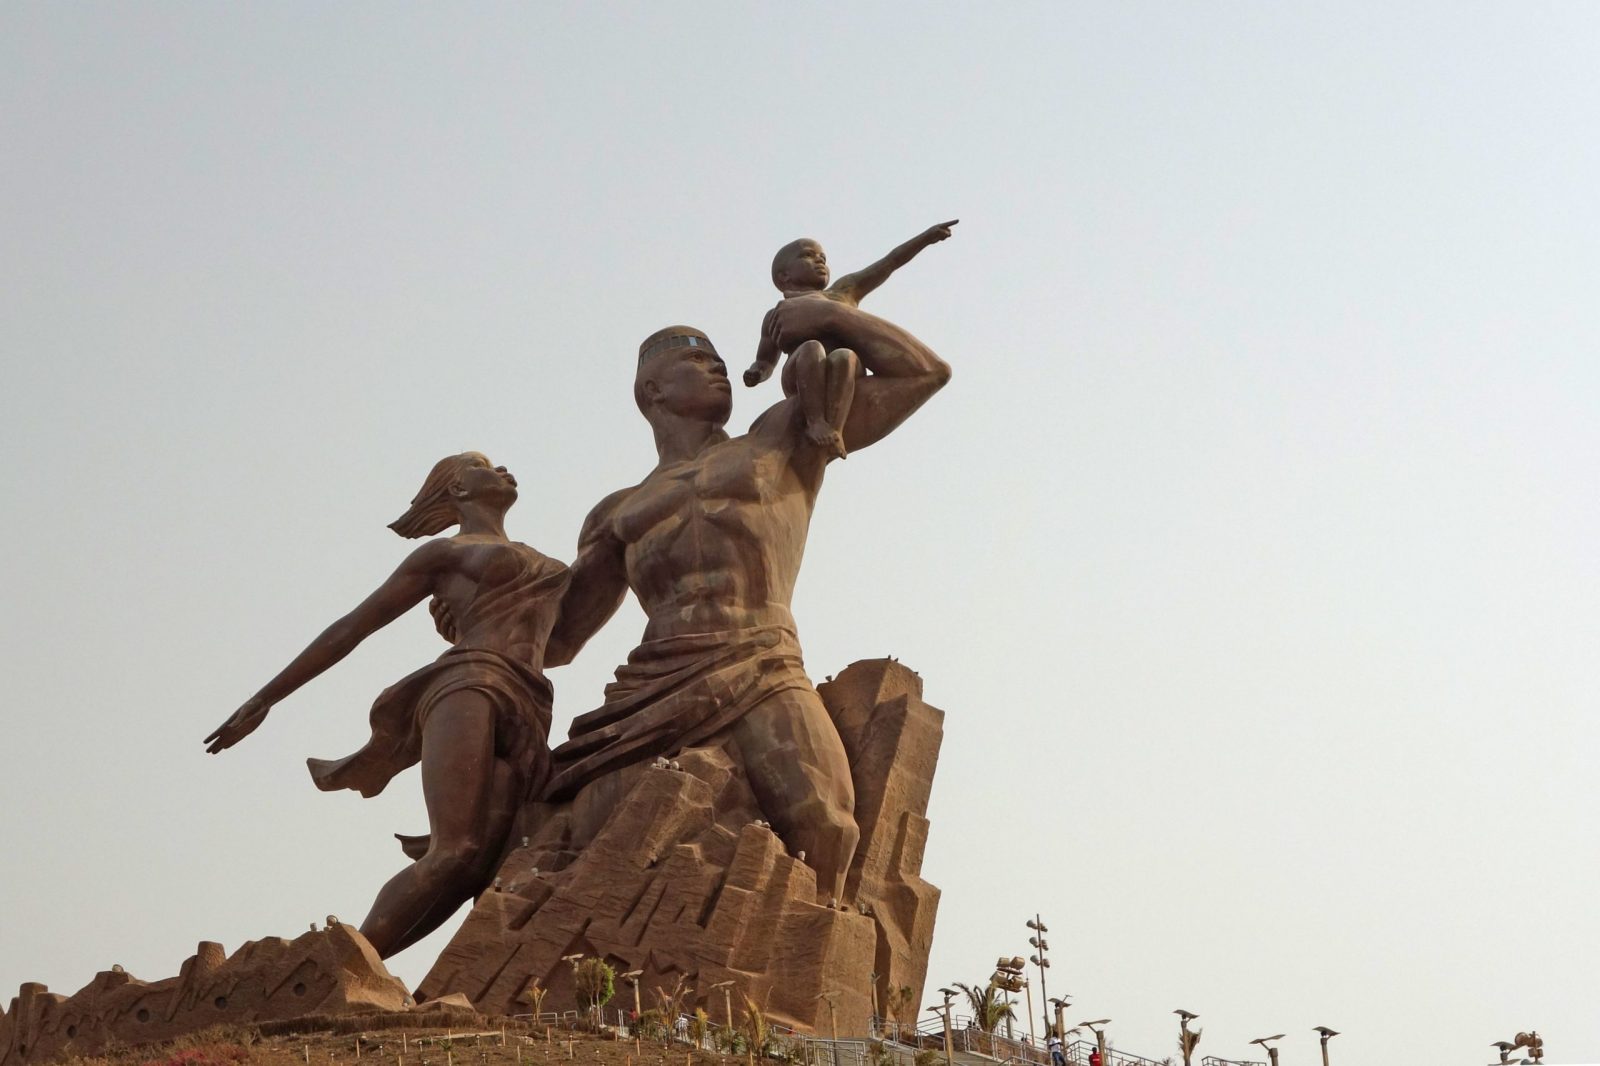 Can You Pass This 40-Question Geography Test That Gets Progressively Harder With Each Question? African Renaissance Monument, Senegal